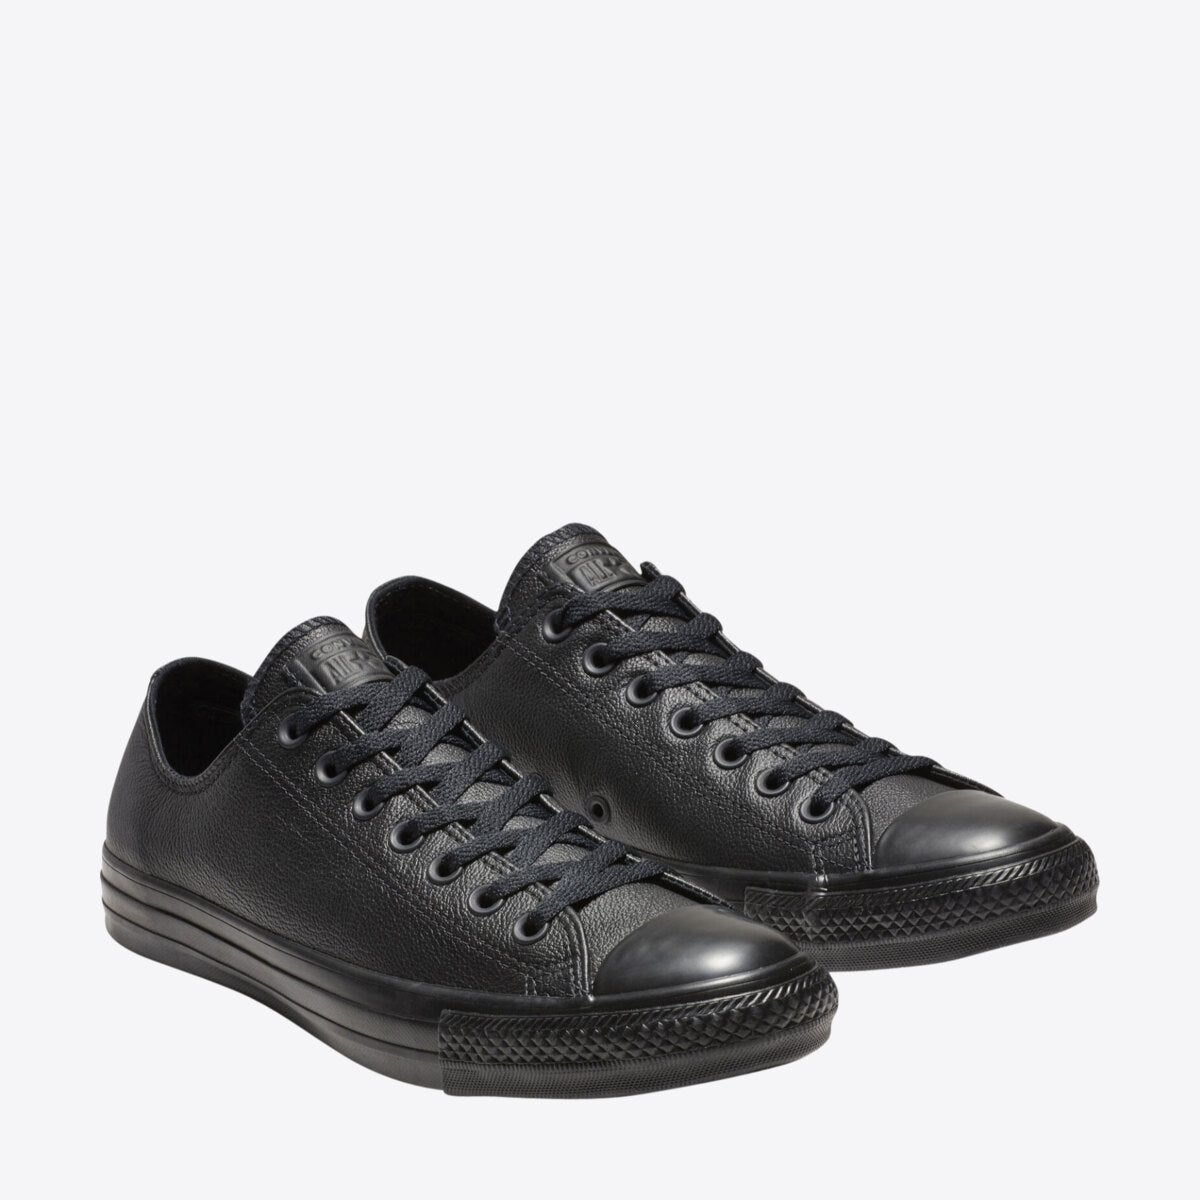 CONVERSE Chuck Taylor All Star Leather Low Black Mono - Image 3